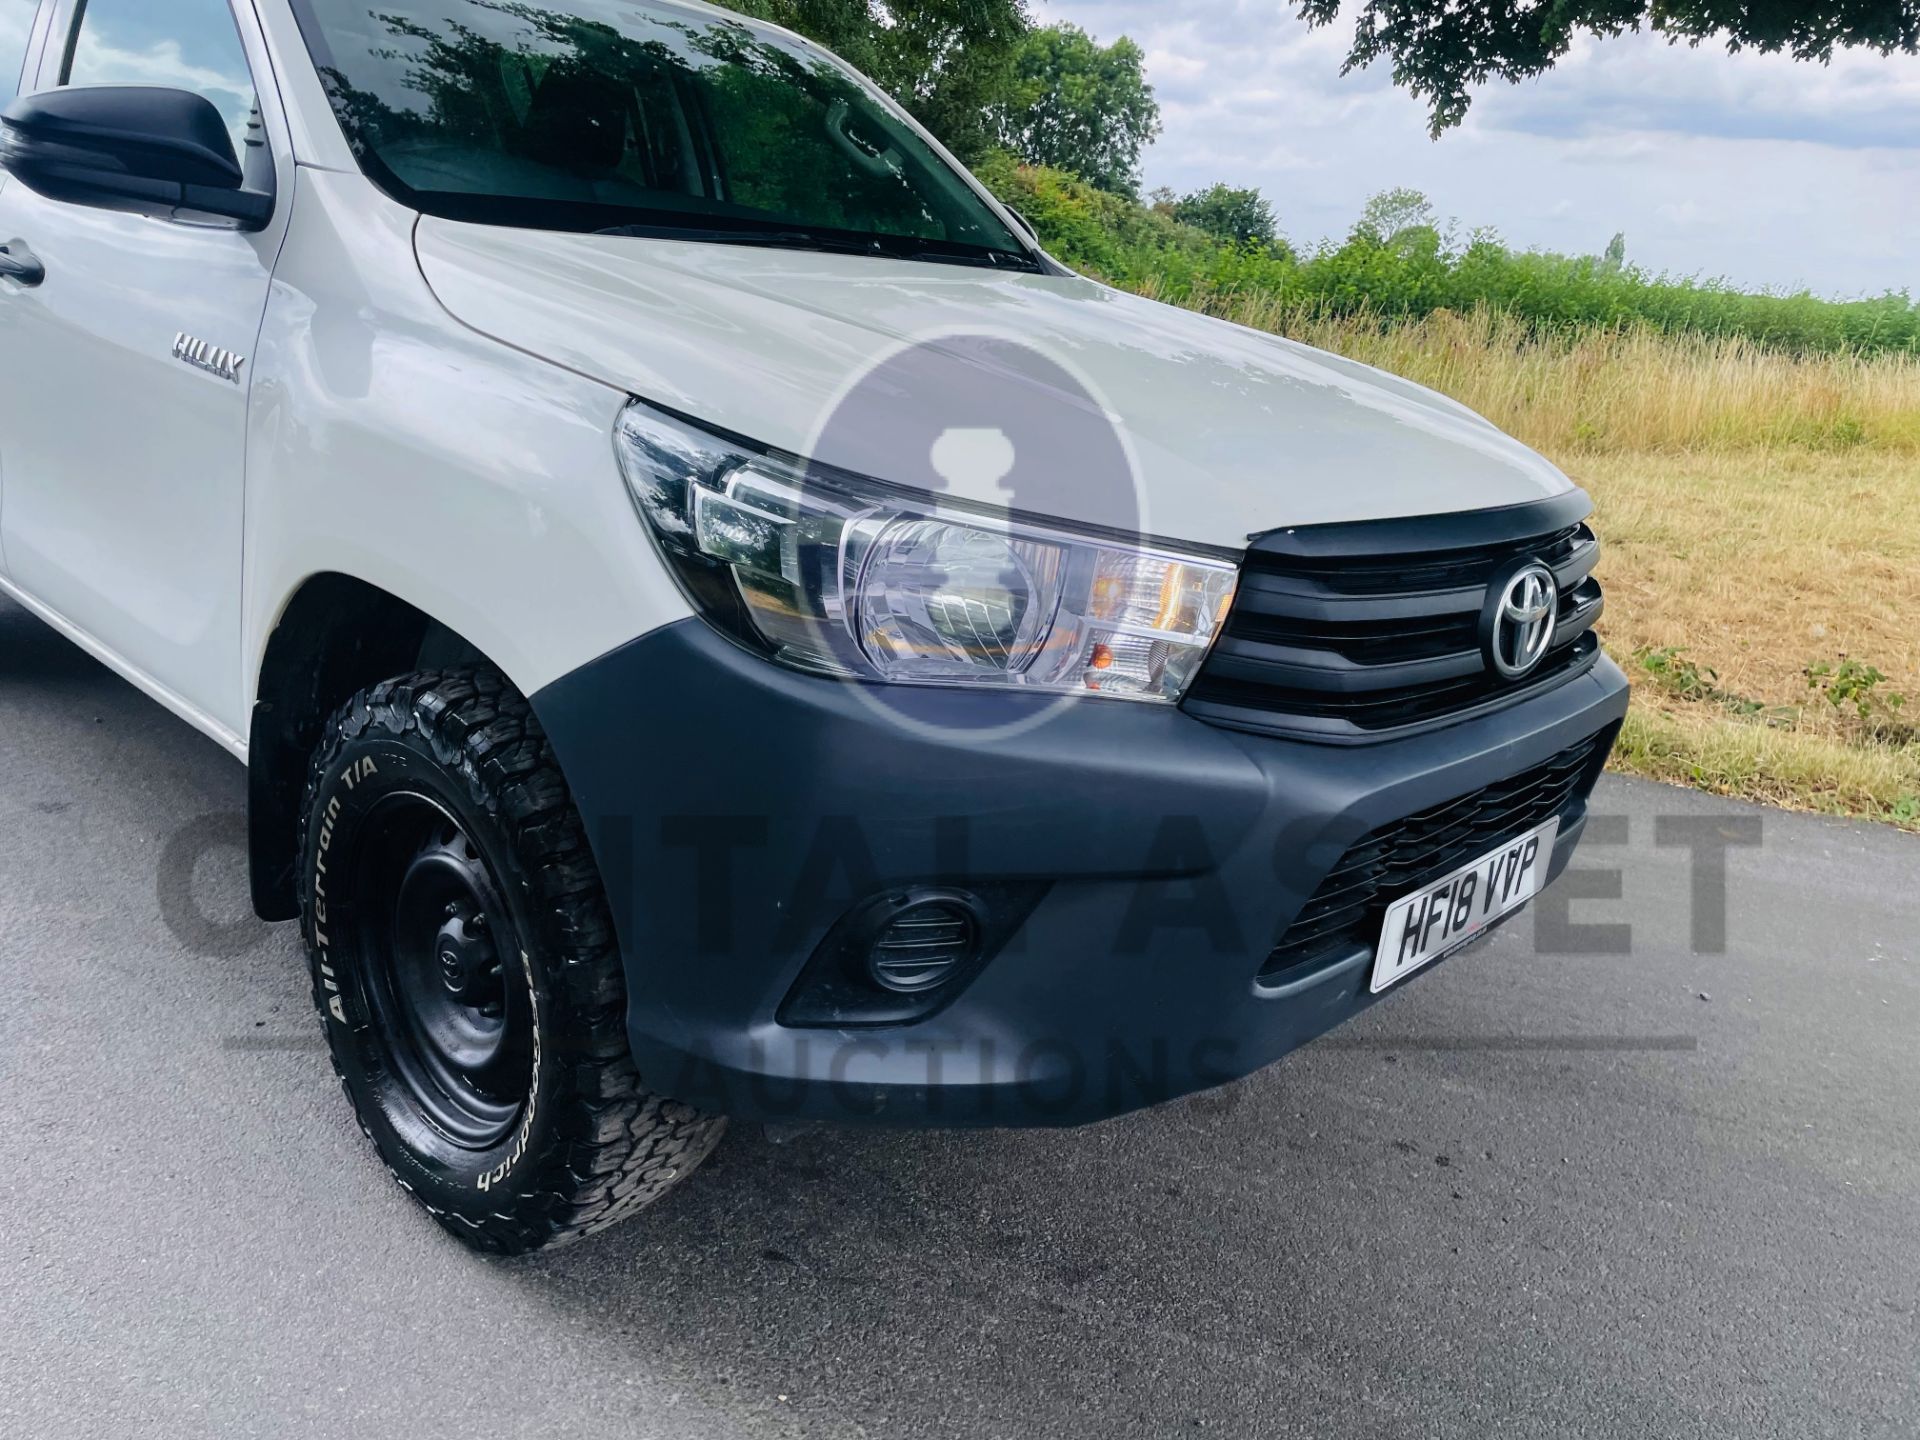 TOYOTA HILUX *DOUBLE CAB PICK-UP* (2018 - EURO 6) 2.4 D4-D - 6 SPEED (1 OWNER) *ULTRA LOW MILES* - Image 15 of 42